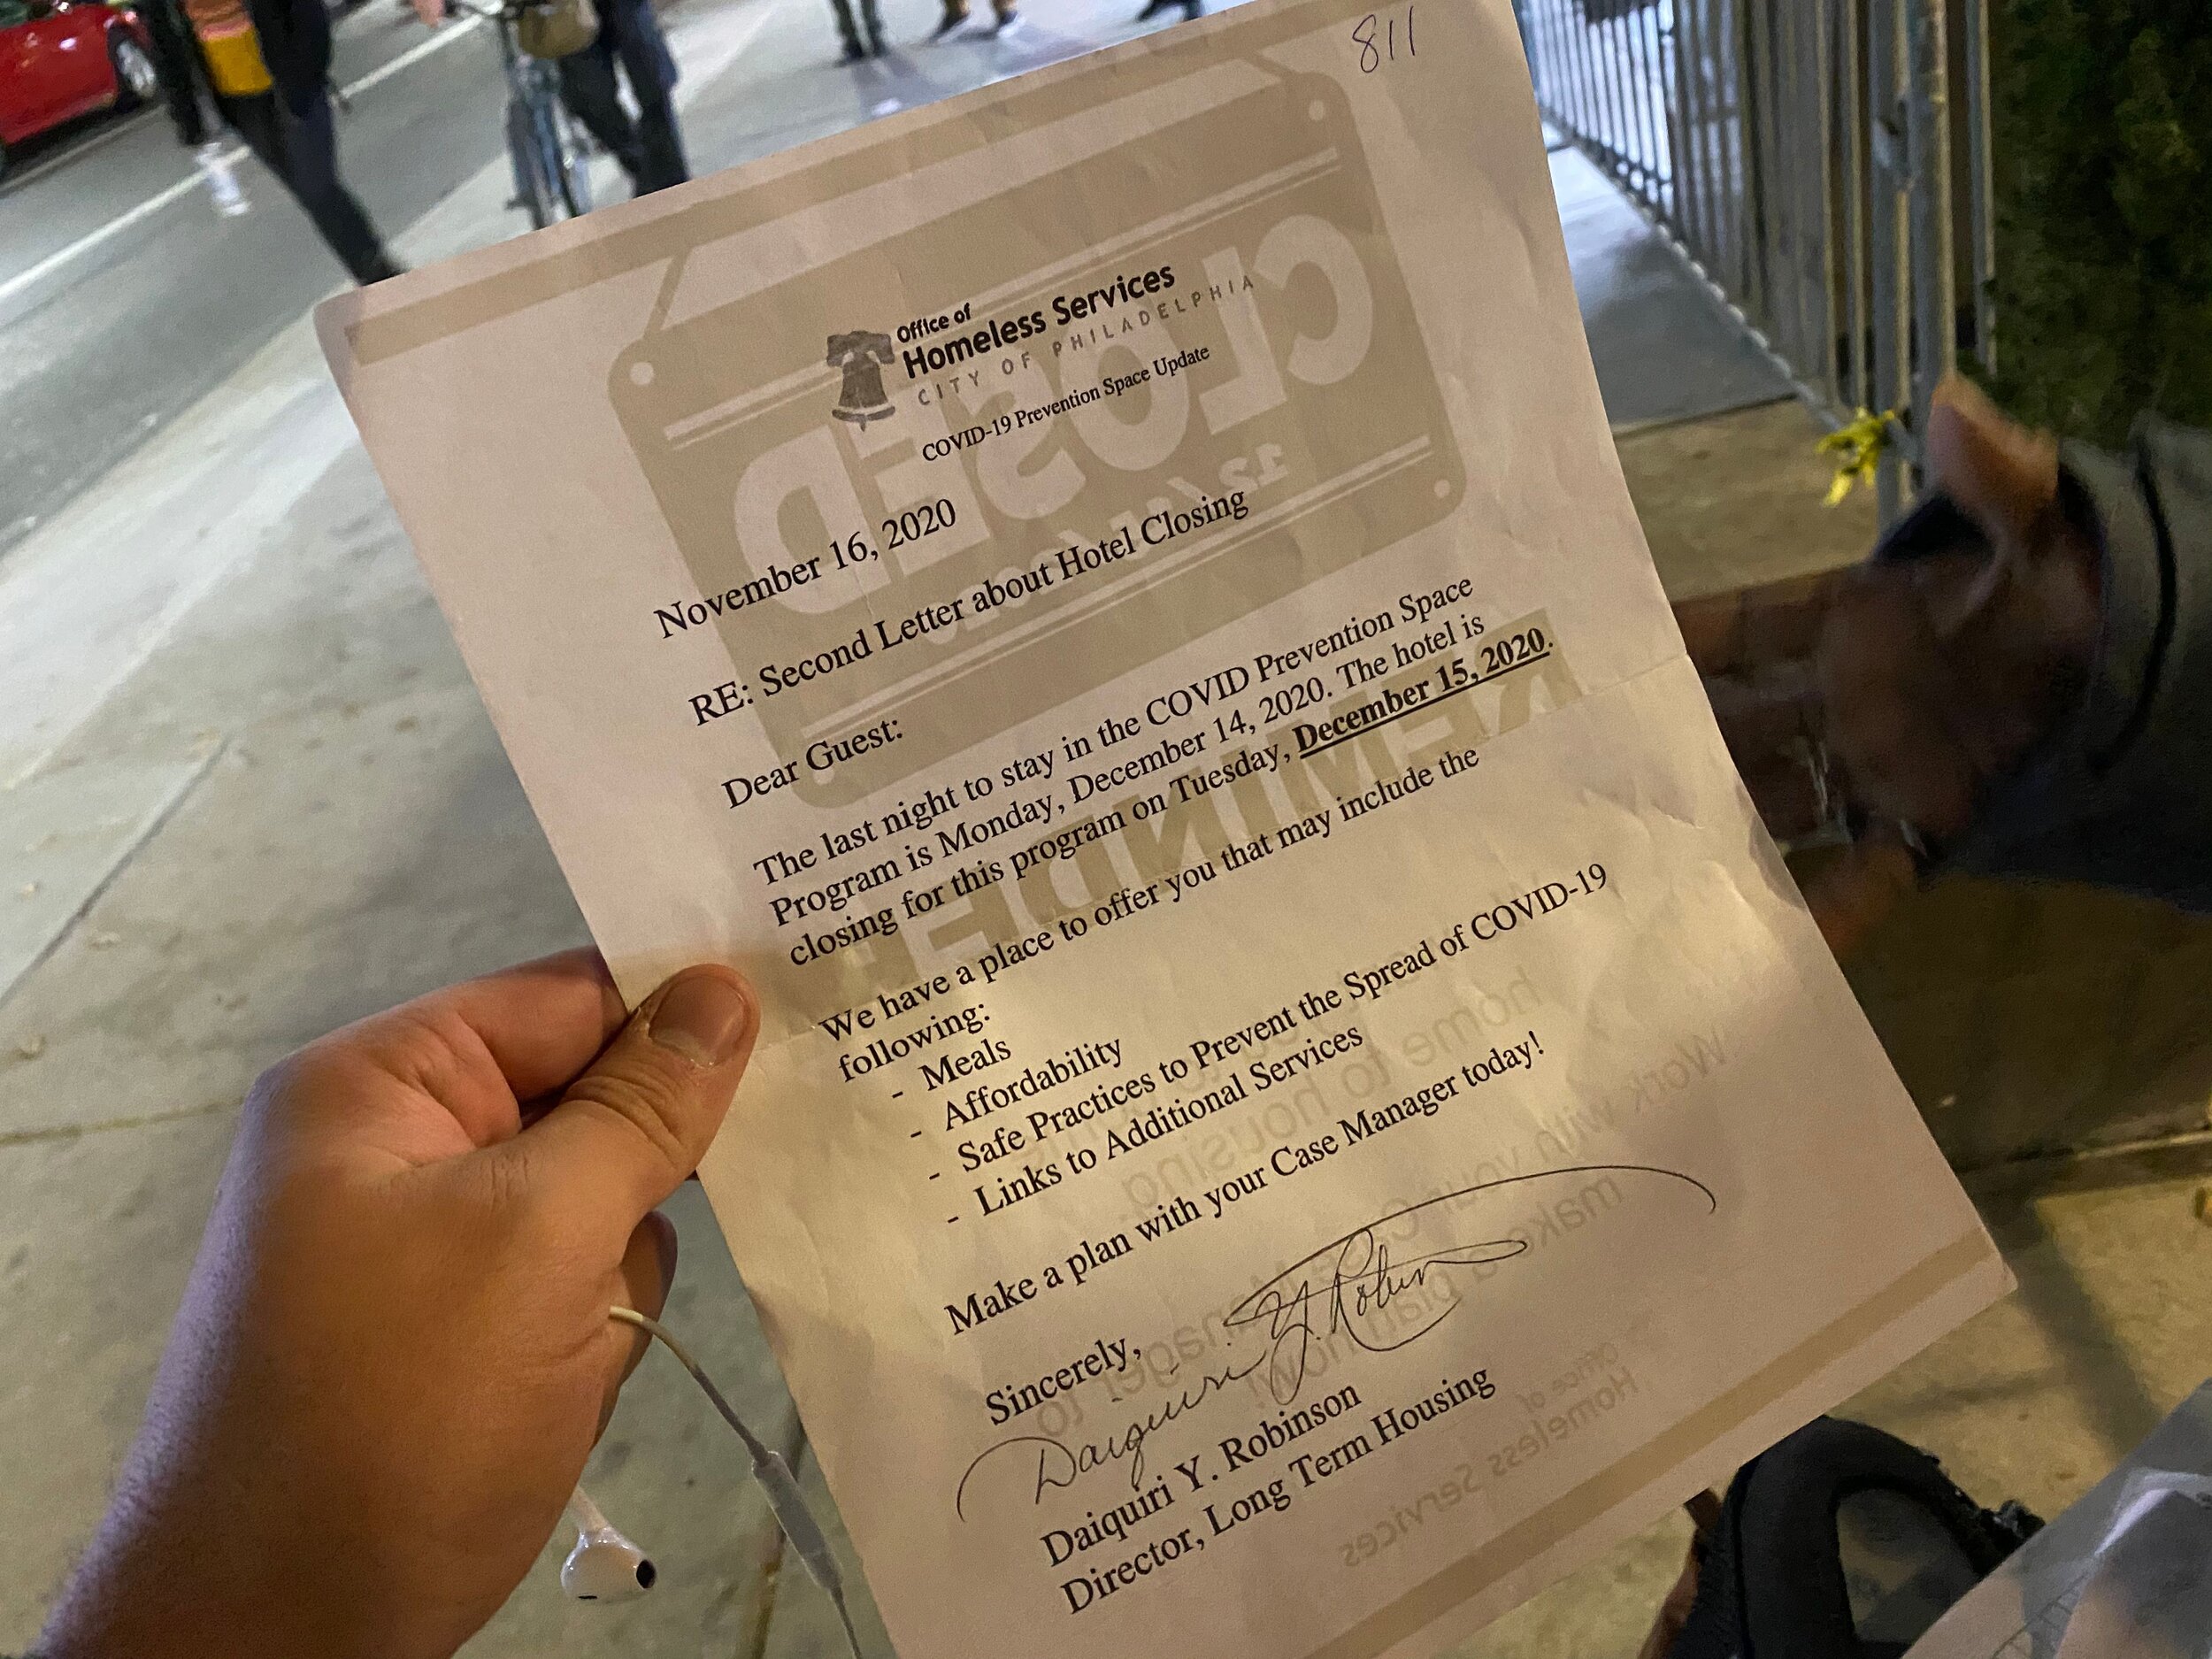 Letter from the City of Philadelphia Office of Homeless Services regarding the closing of COVID Prevention Space Program. Photographs by Jason N. Peters